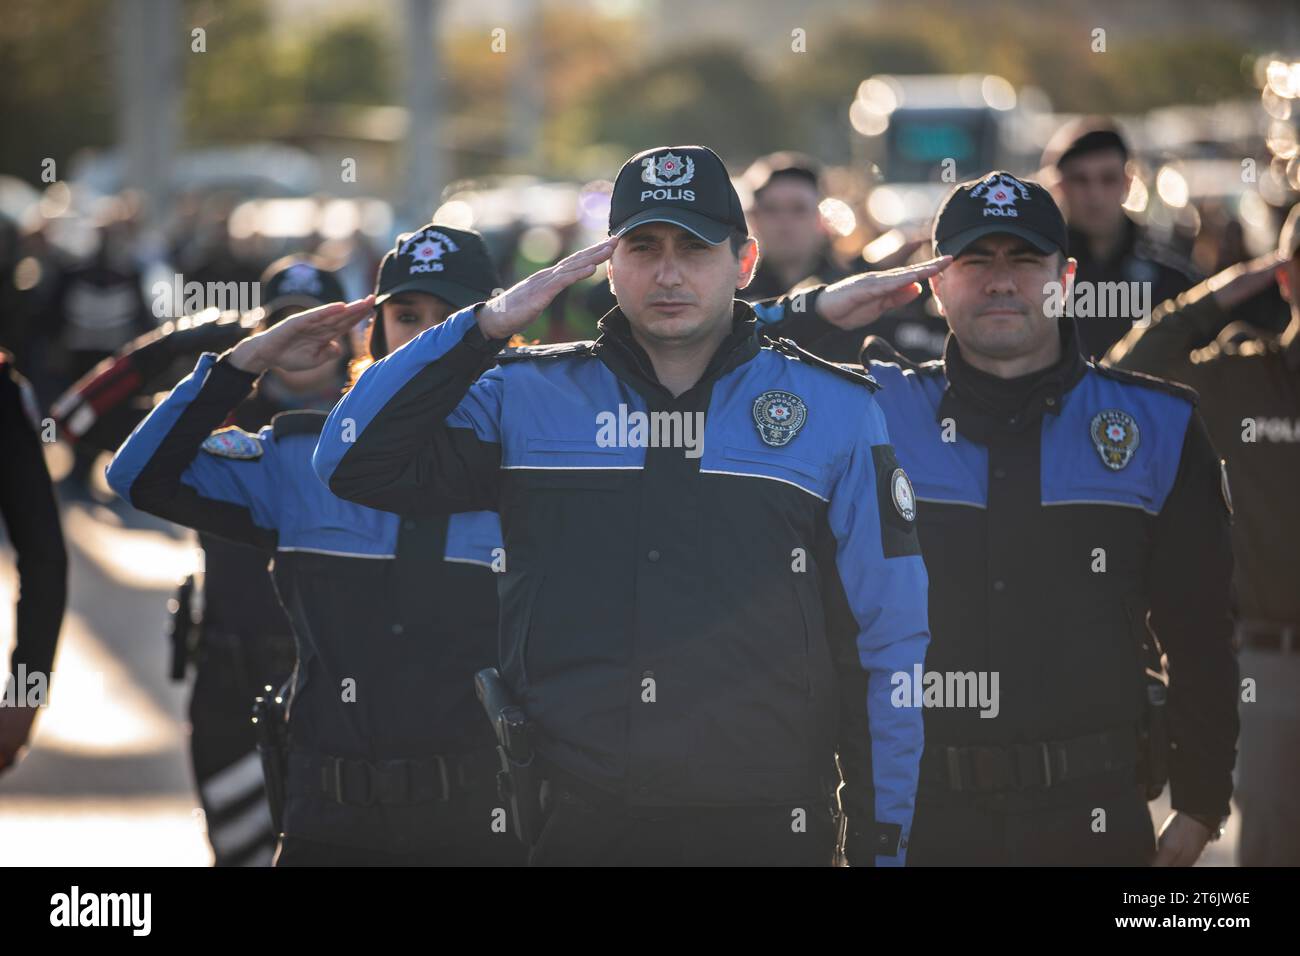 Police officers stand in silence at 09:05 a.m to commemorate the death time of Mustafa Kemal Ataturk, founder of the Republic of Turkey, on the 85th anniversary of his demise at July 15th Martyrs Bridge in Istanbul. Stock Photo